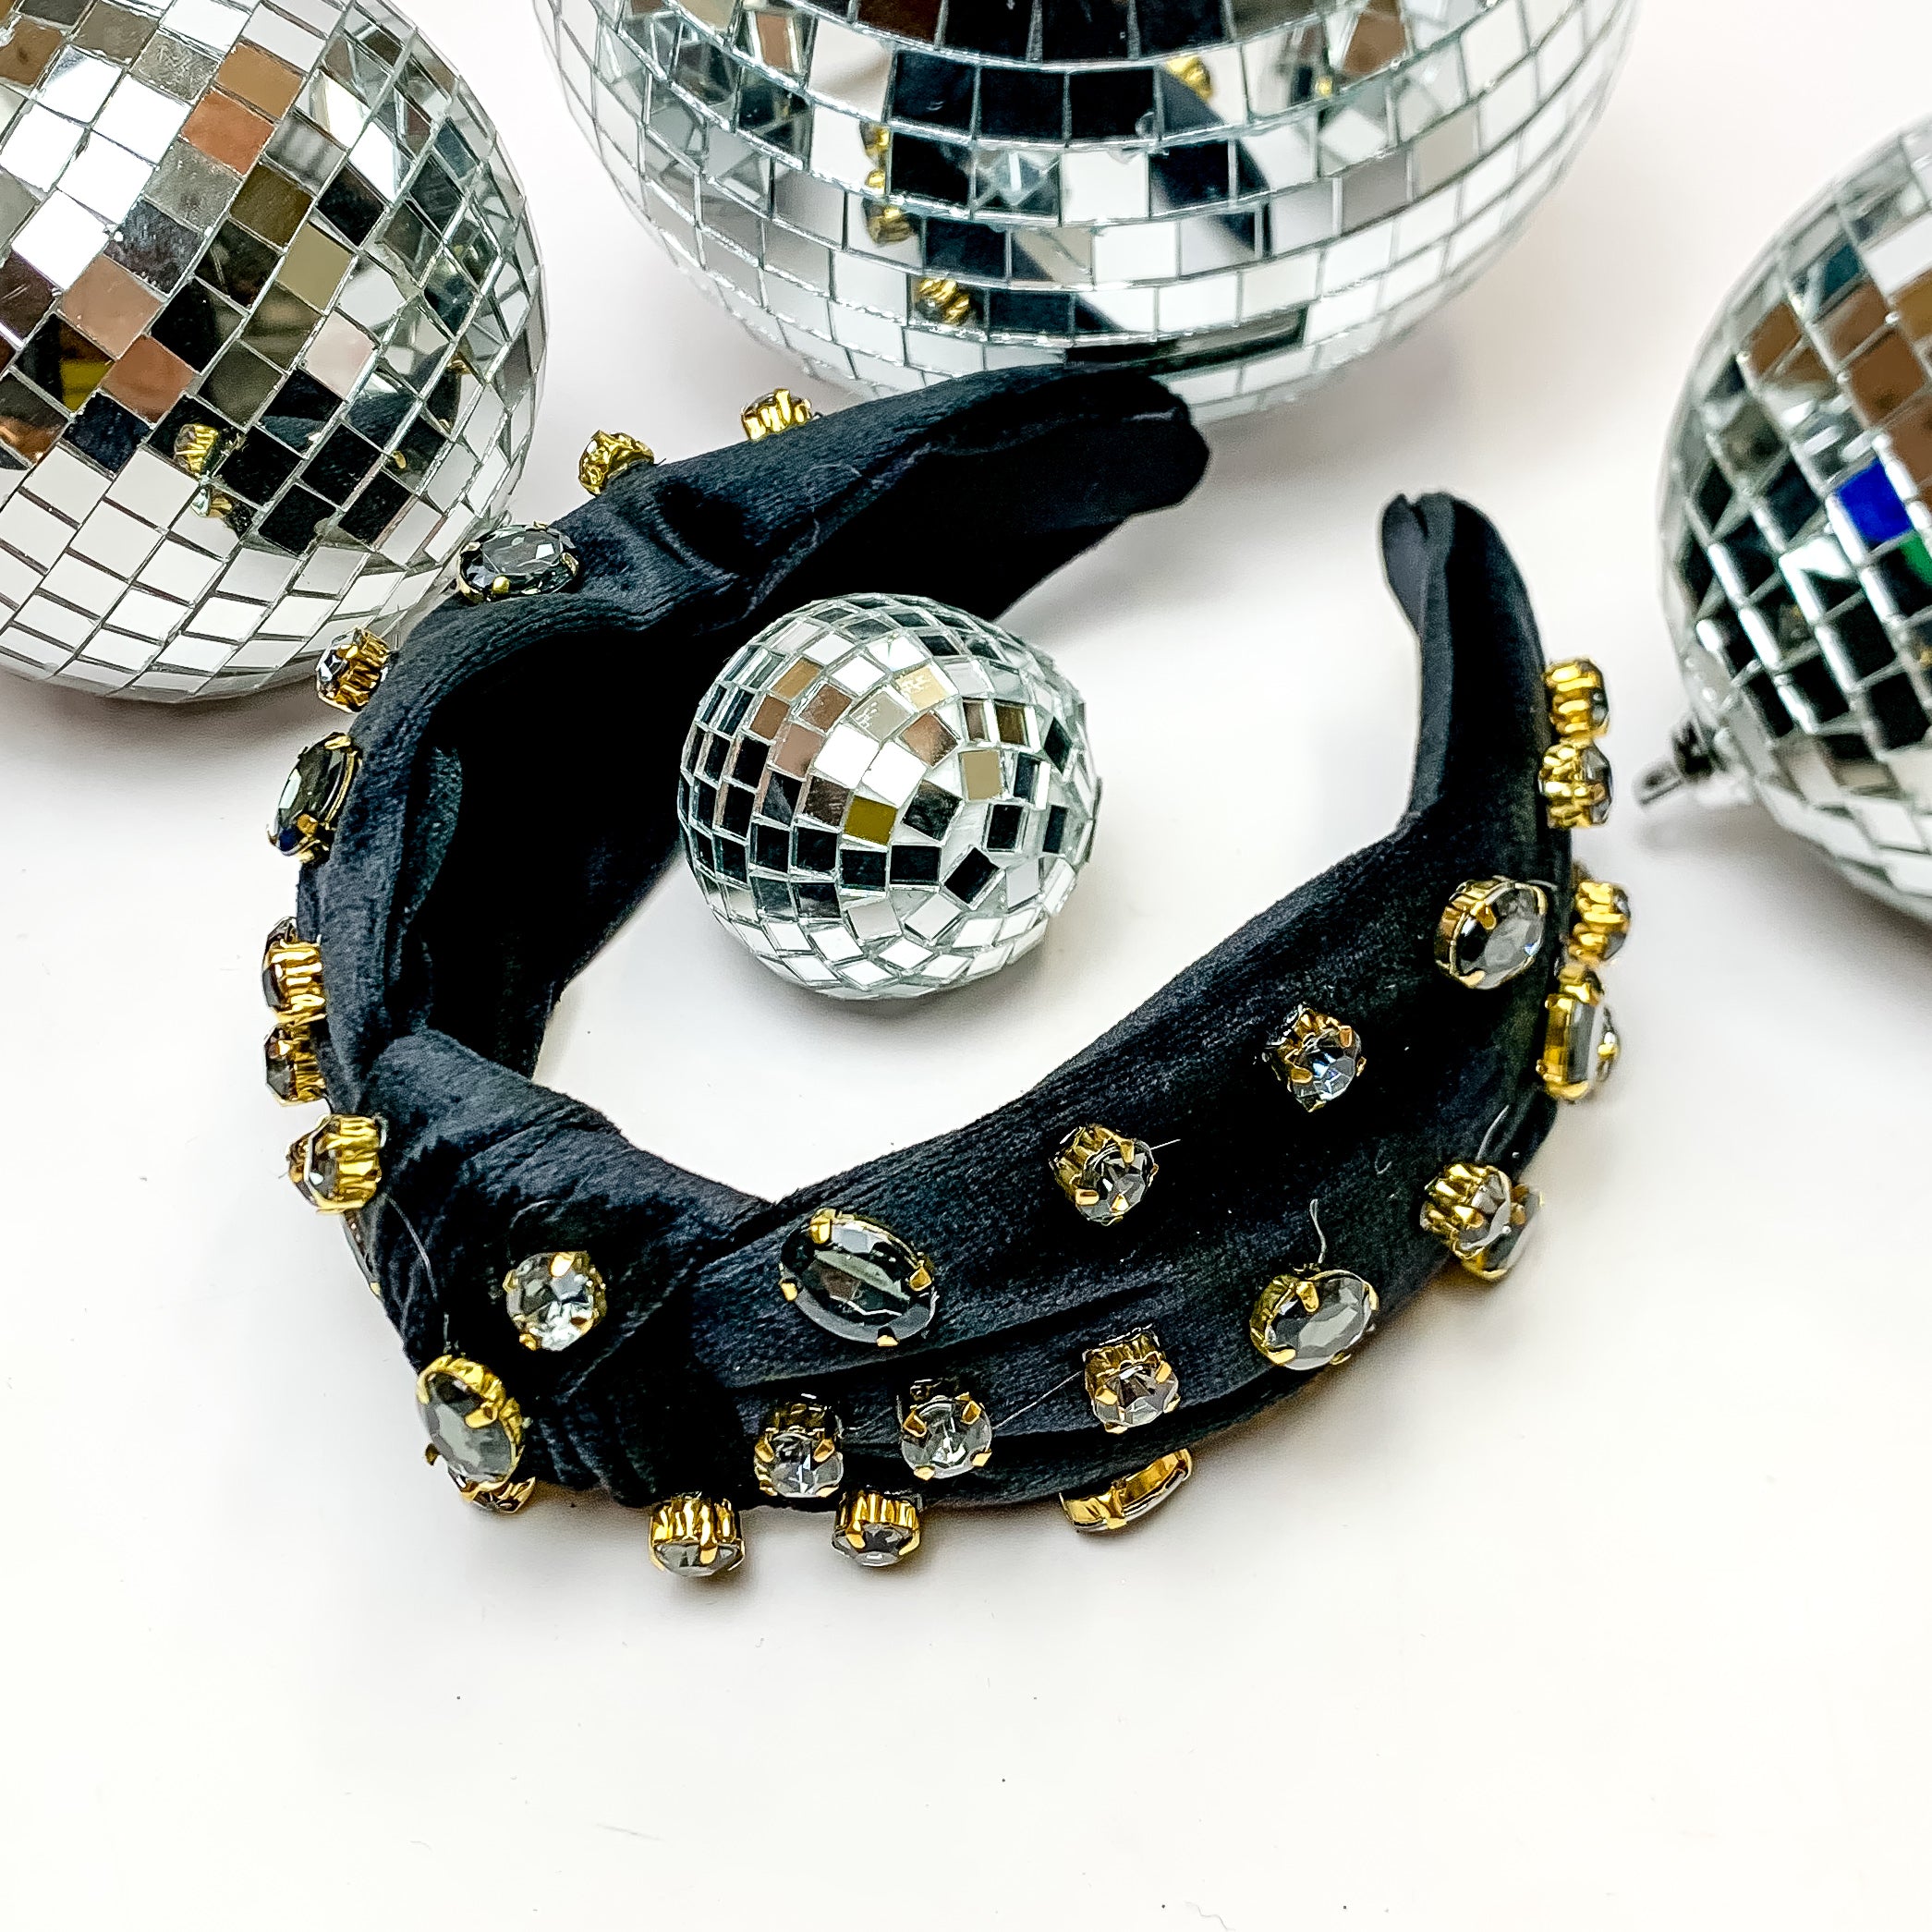 Crystal Detailed Velvet Knot Headband in Black. This headband is pictured on a white background and is surrounded by disco balls.